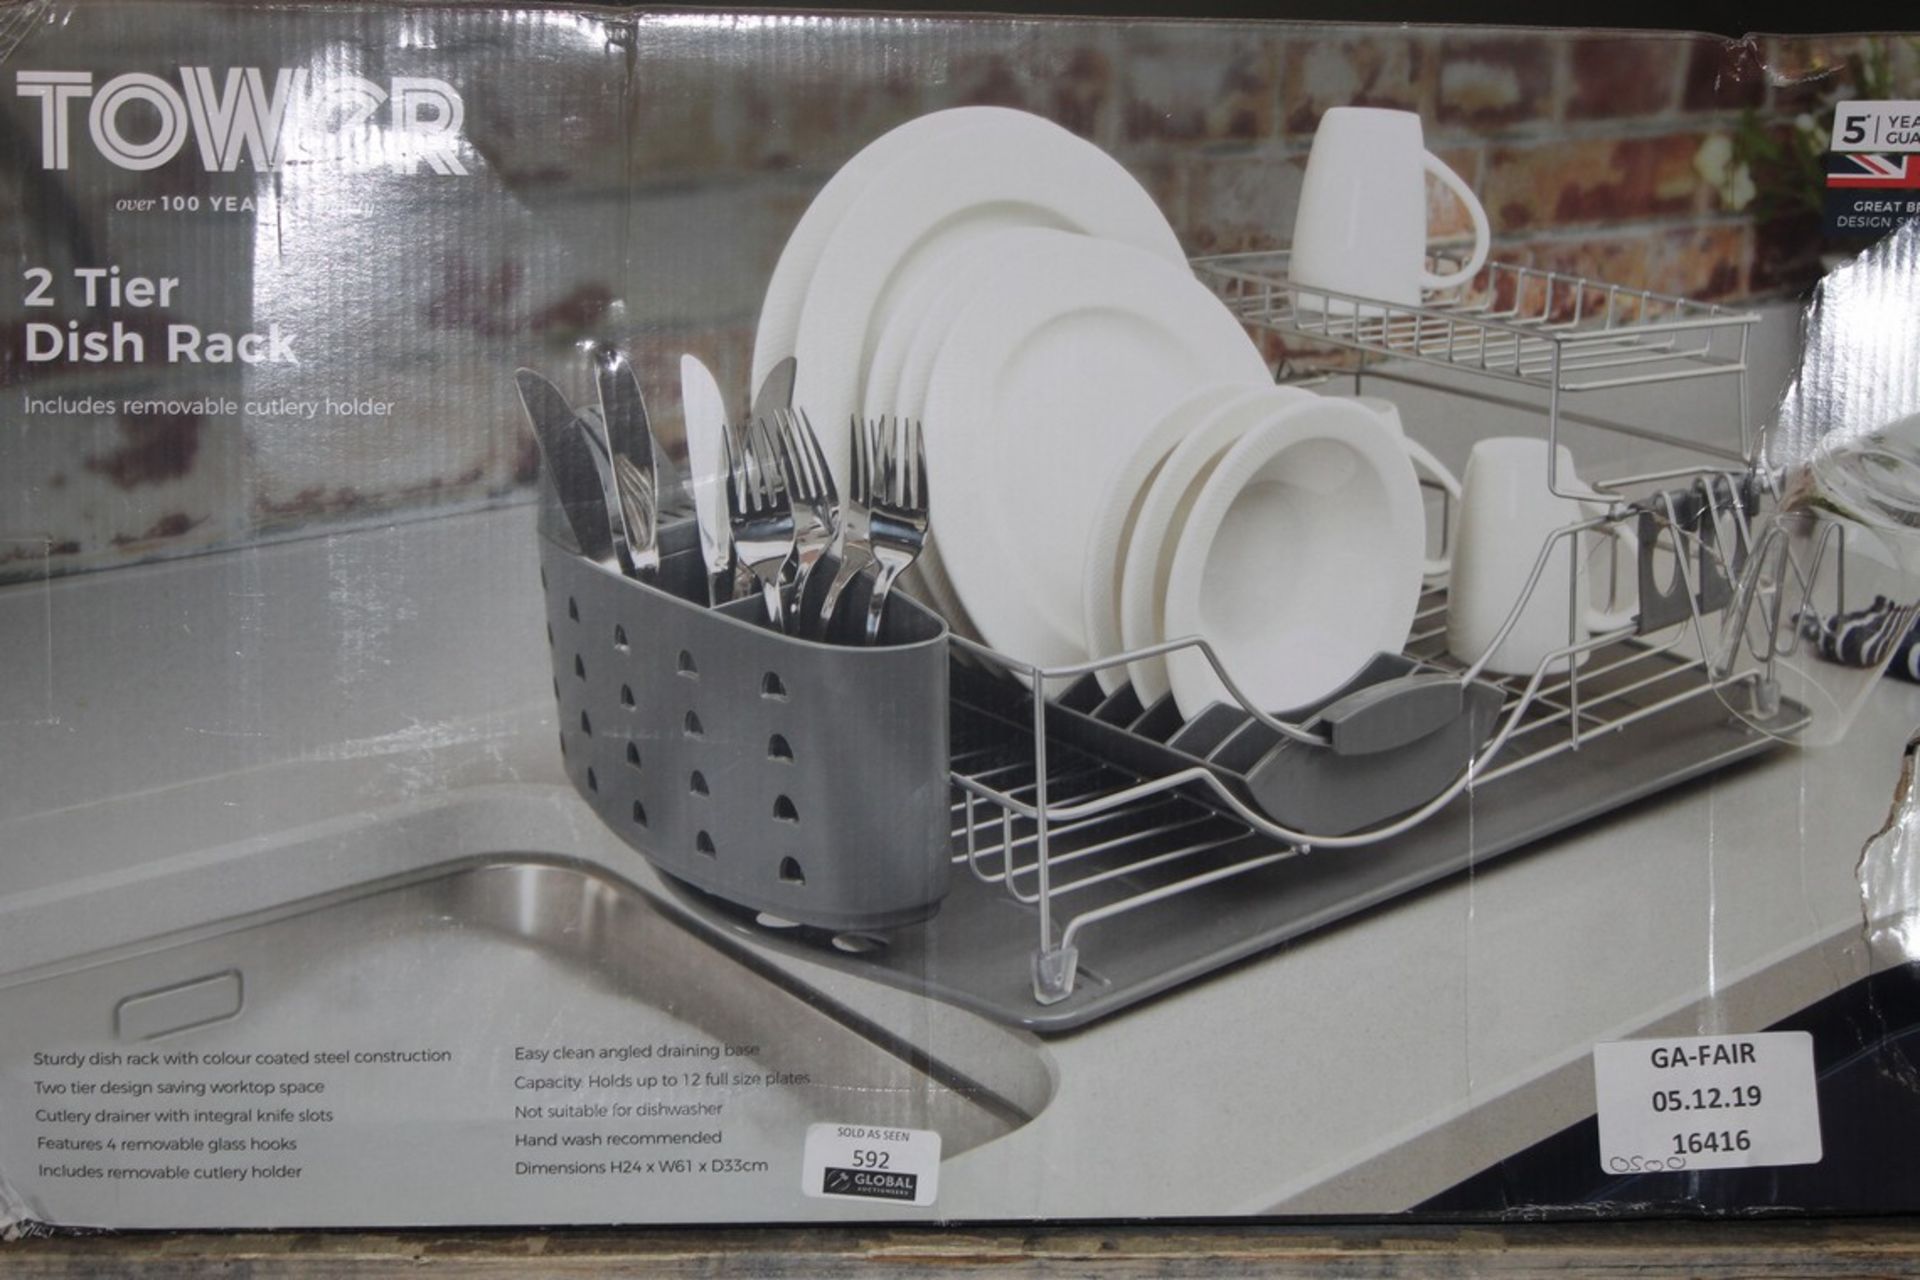 Boxed Tower 2 Tier Dish Rack RRP £50 (16416) (Public Viewing and Appraisals Available)